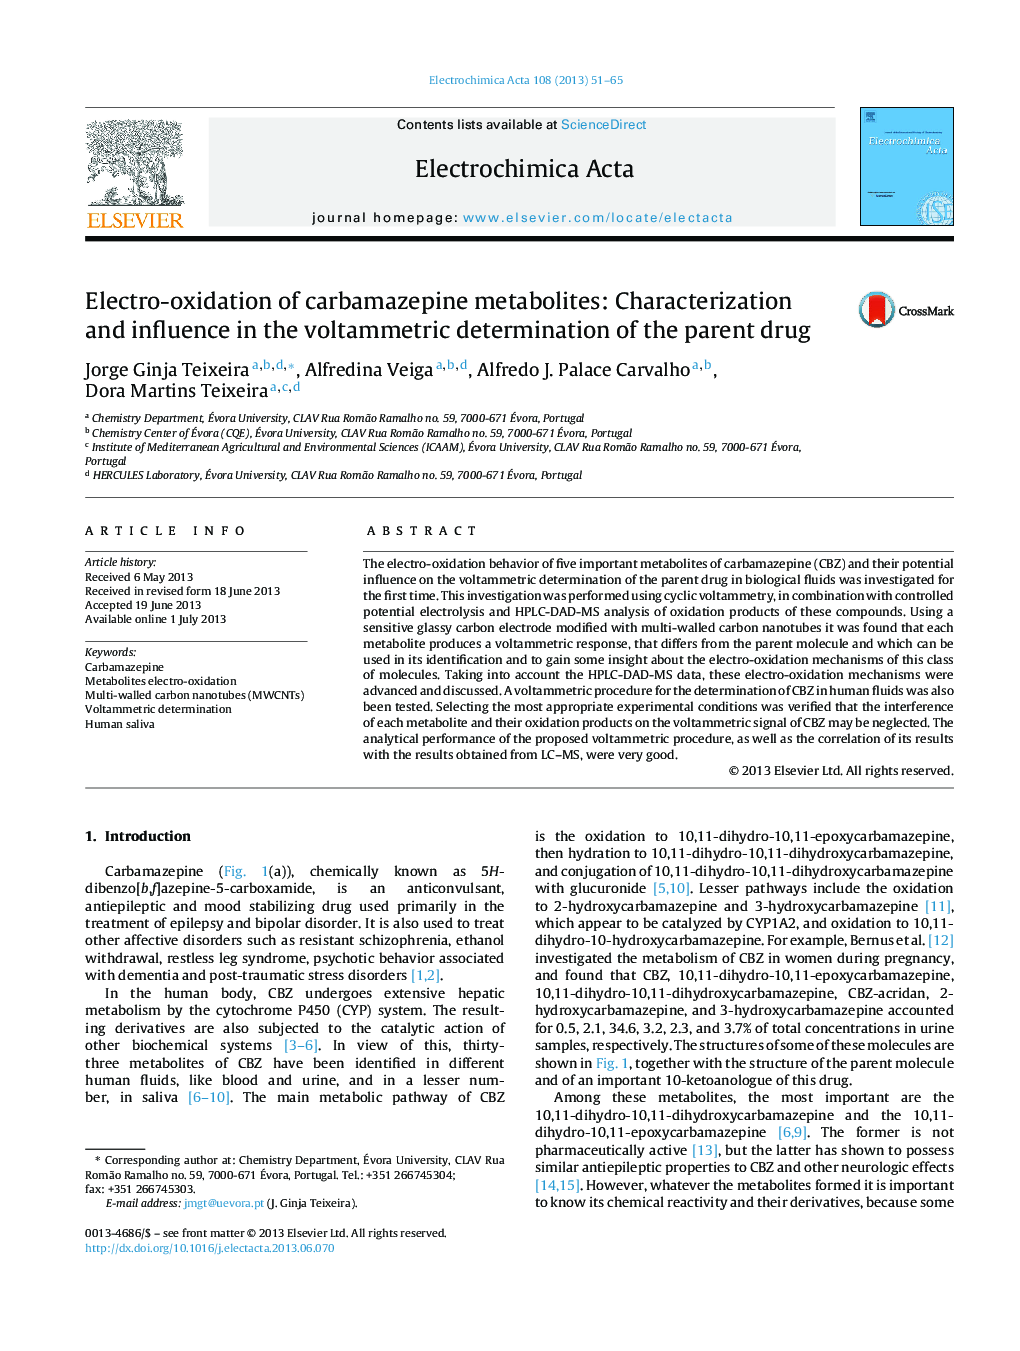 Electro-oxidation of carbamazepine metabolites: Characterization and influence in the voltammetric determination of the parent drug